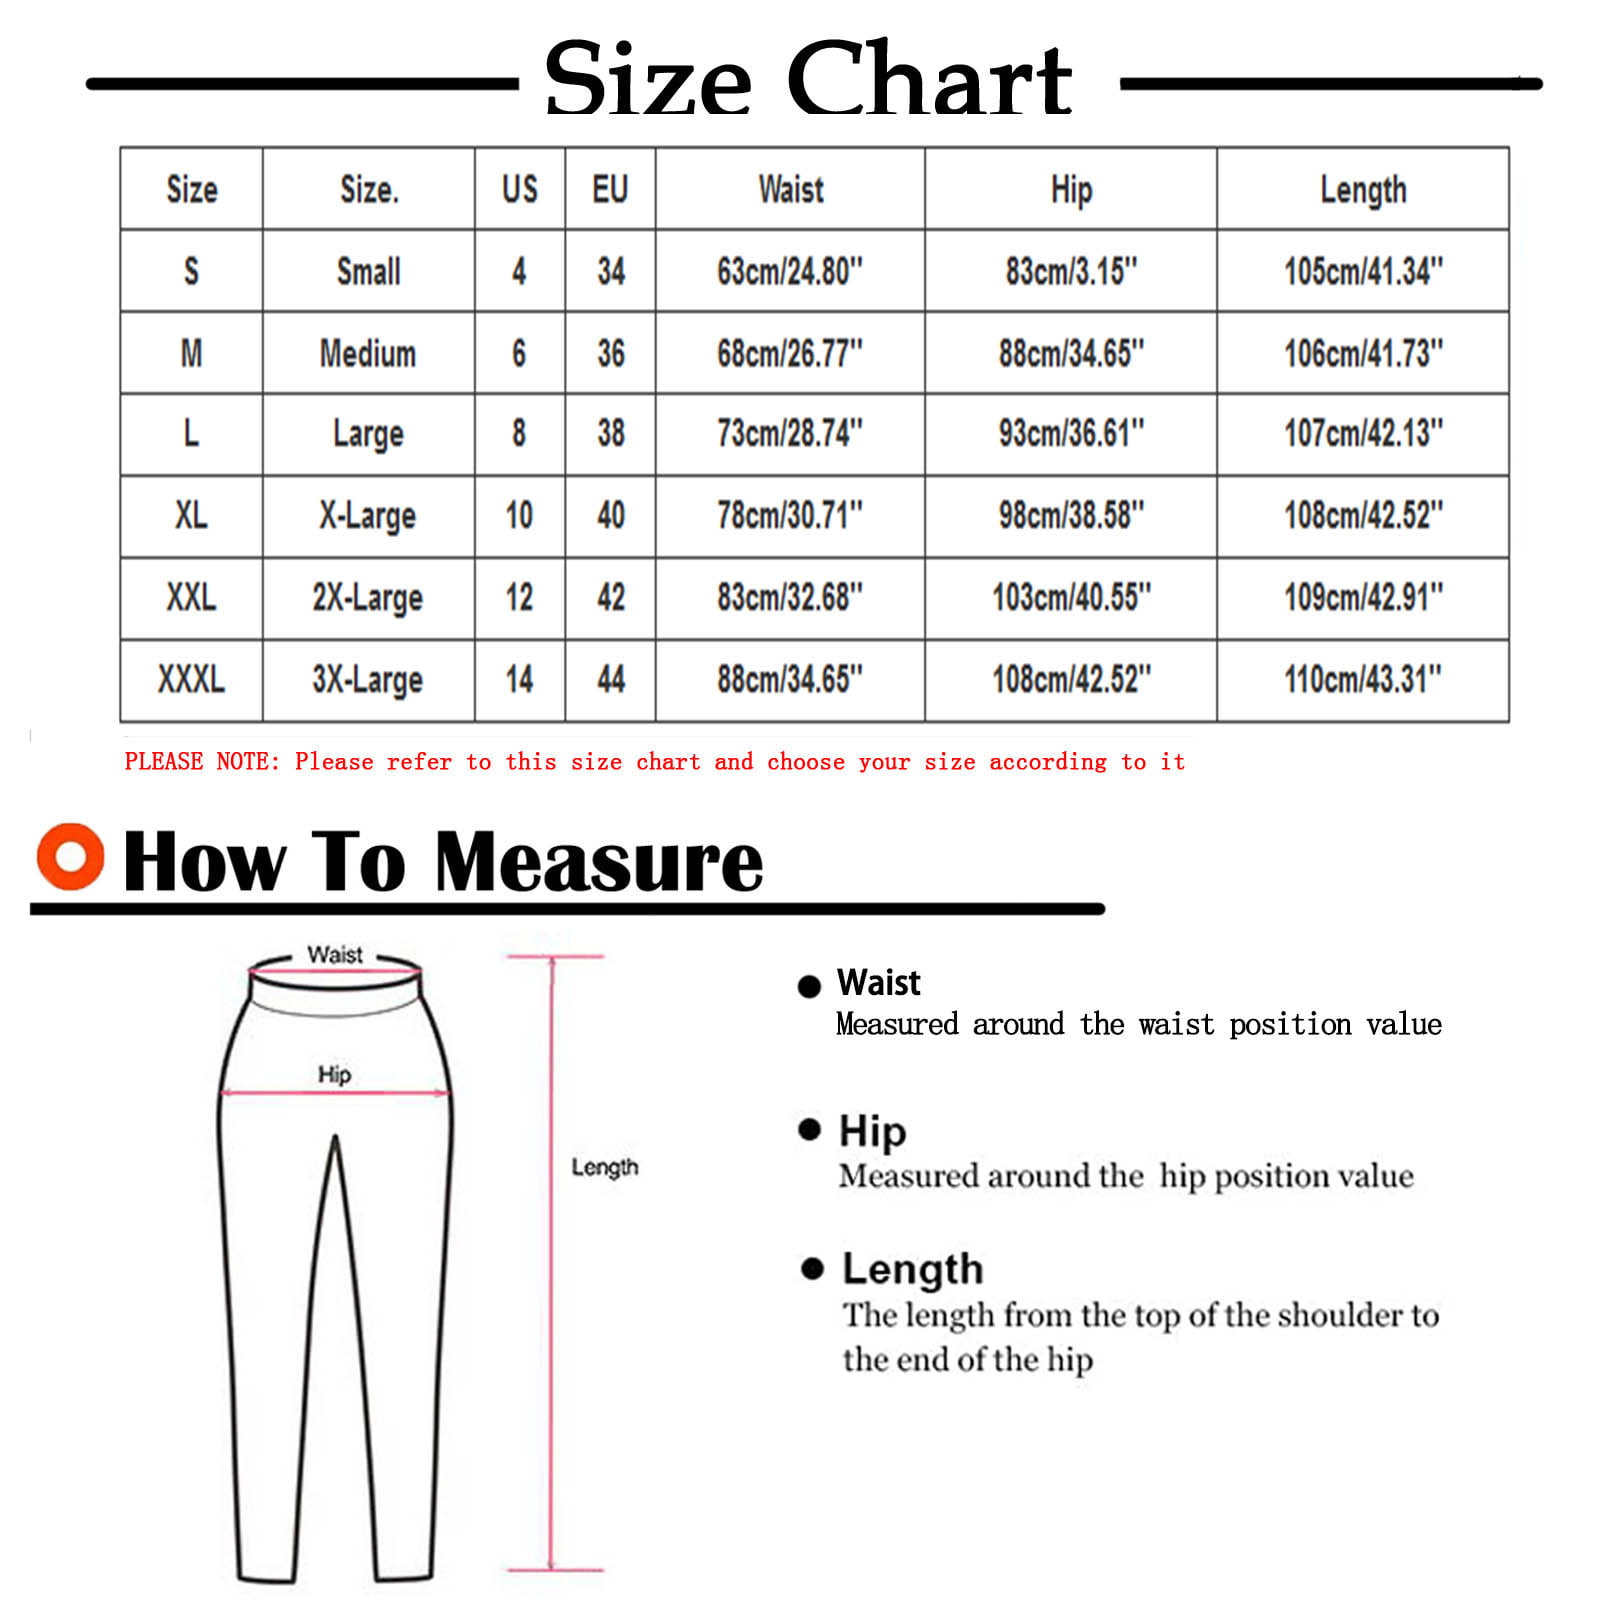 Women's Stretch Bootcut Pants Slim Fit Double Button High Waisted Solid  Color Pants Trendy Casual Full Length Trousers